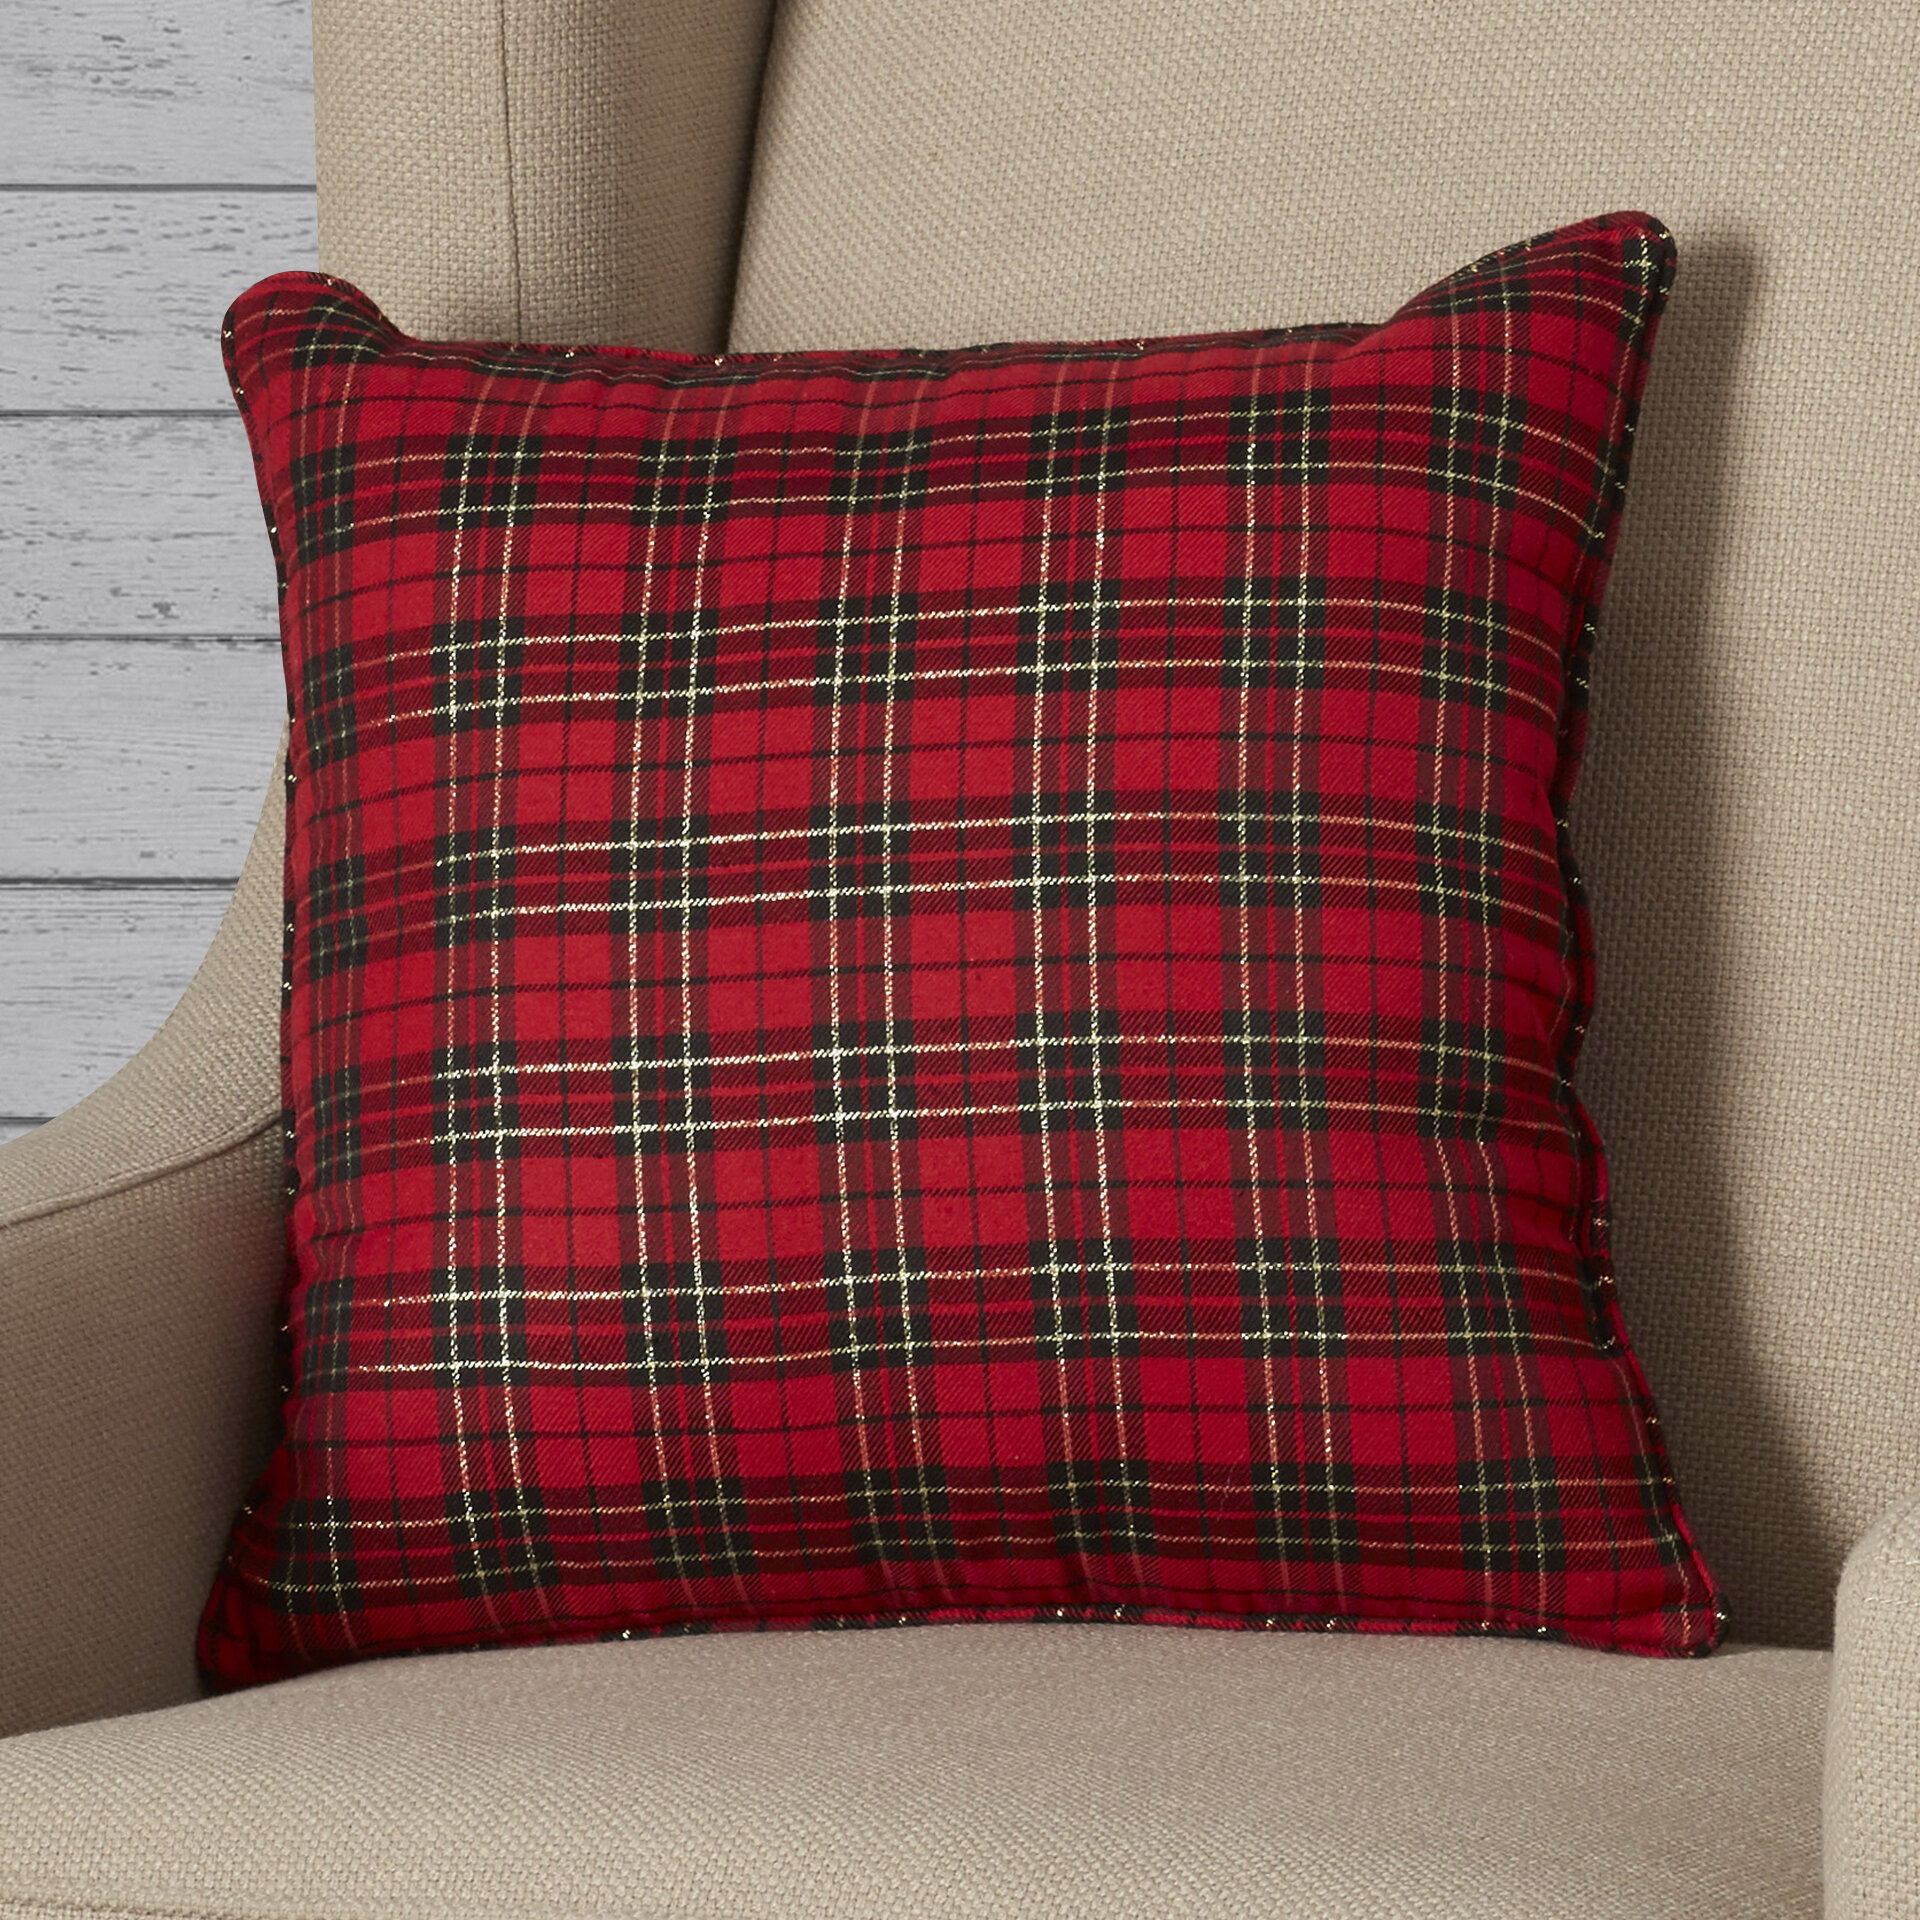 COUNTRY RED PLAID CORD LETTERS SAYING RUSTIC CABIN TEA STAR FAMILY PILLOW 